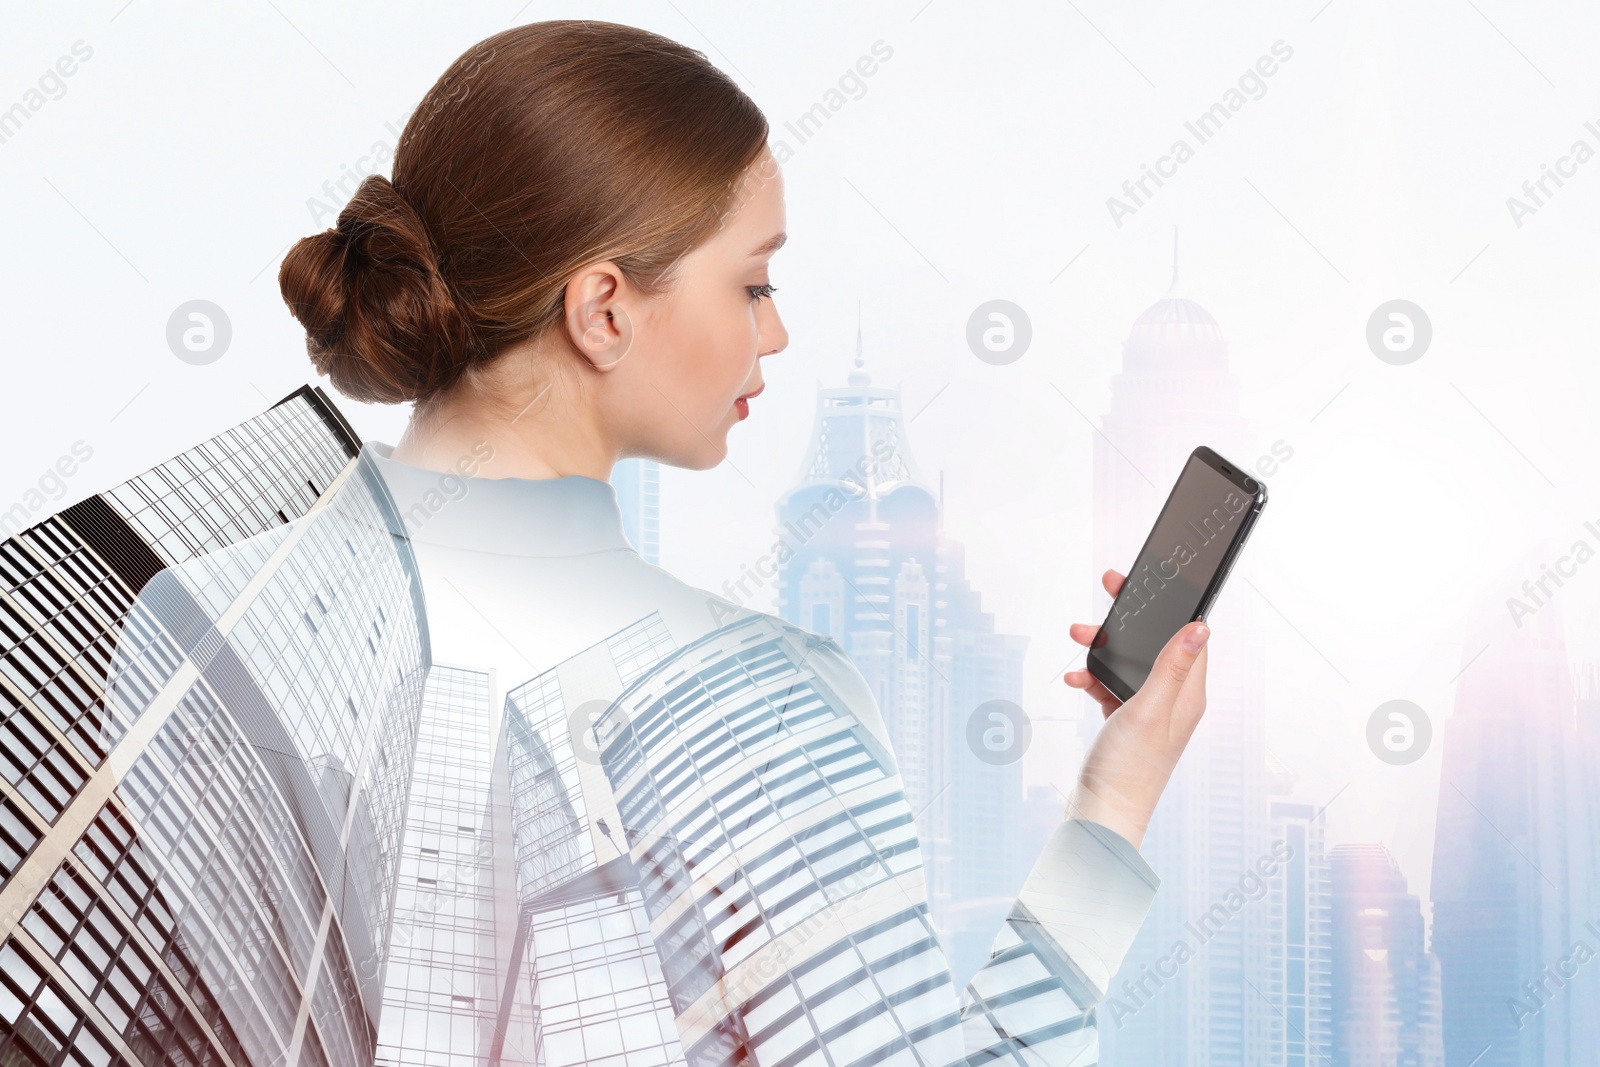 Image of Double exposure of businesswoman with phone and city landscape